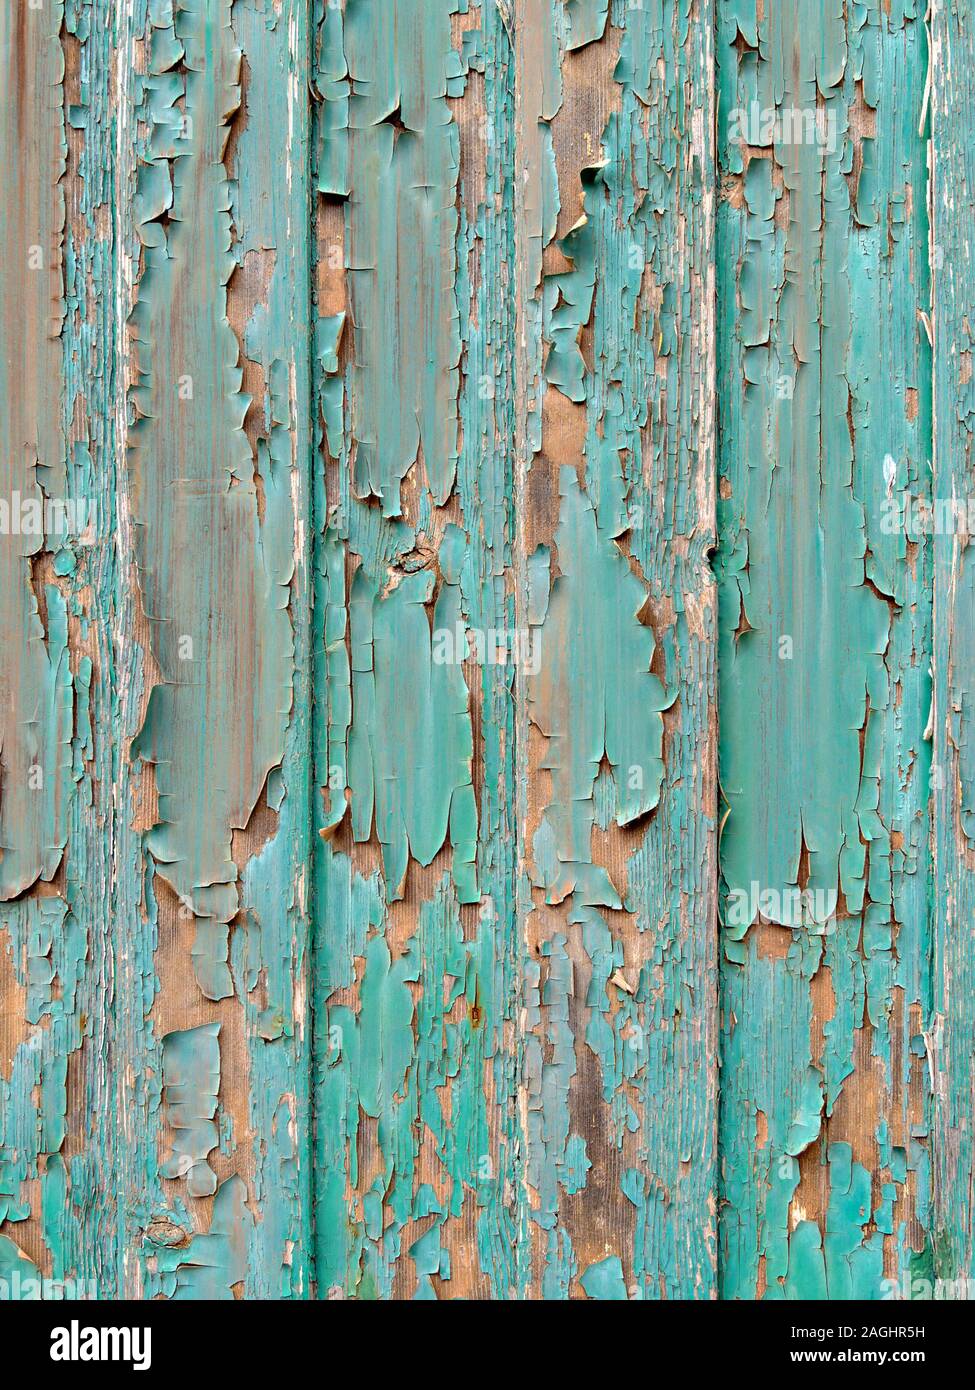 Old peeling and flaking green paint on wooden slats Stock Photo